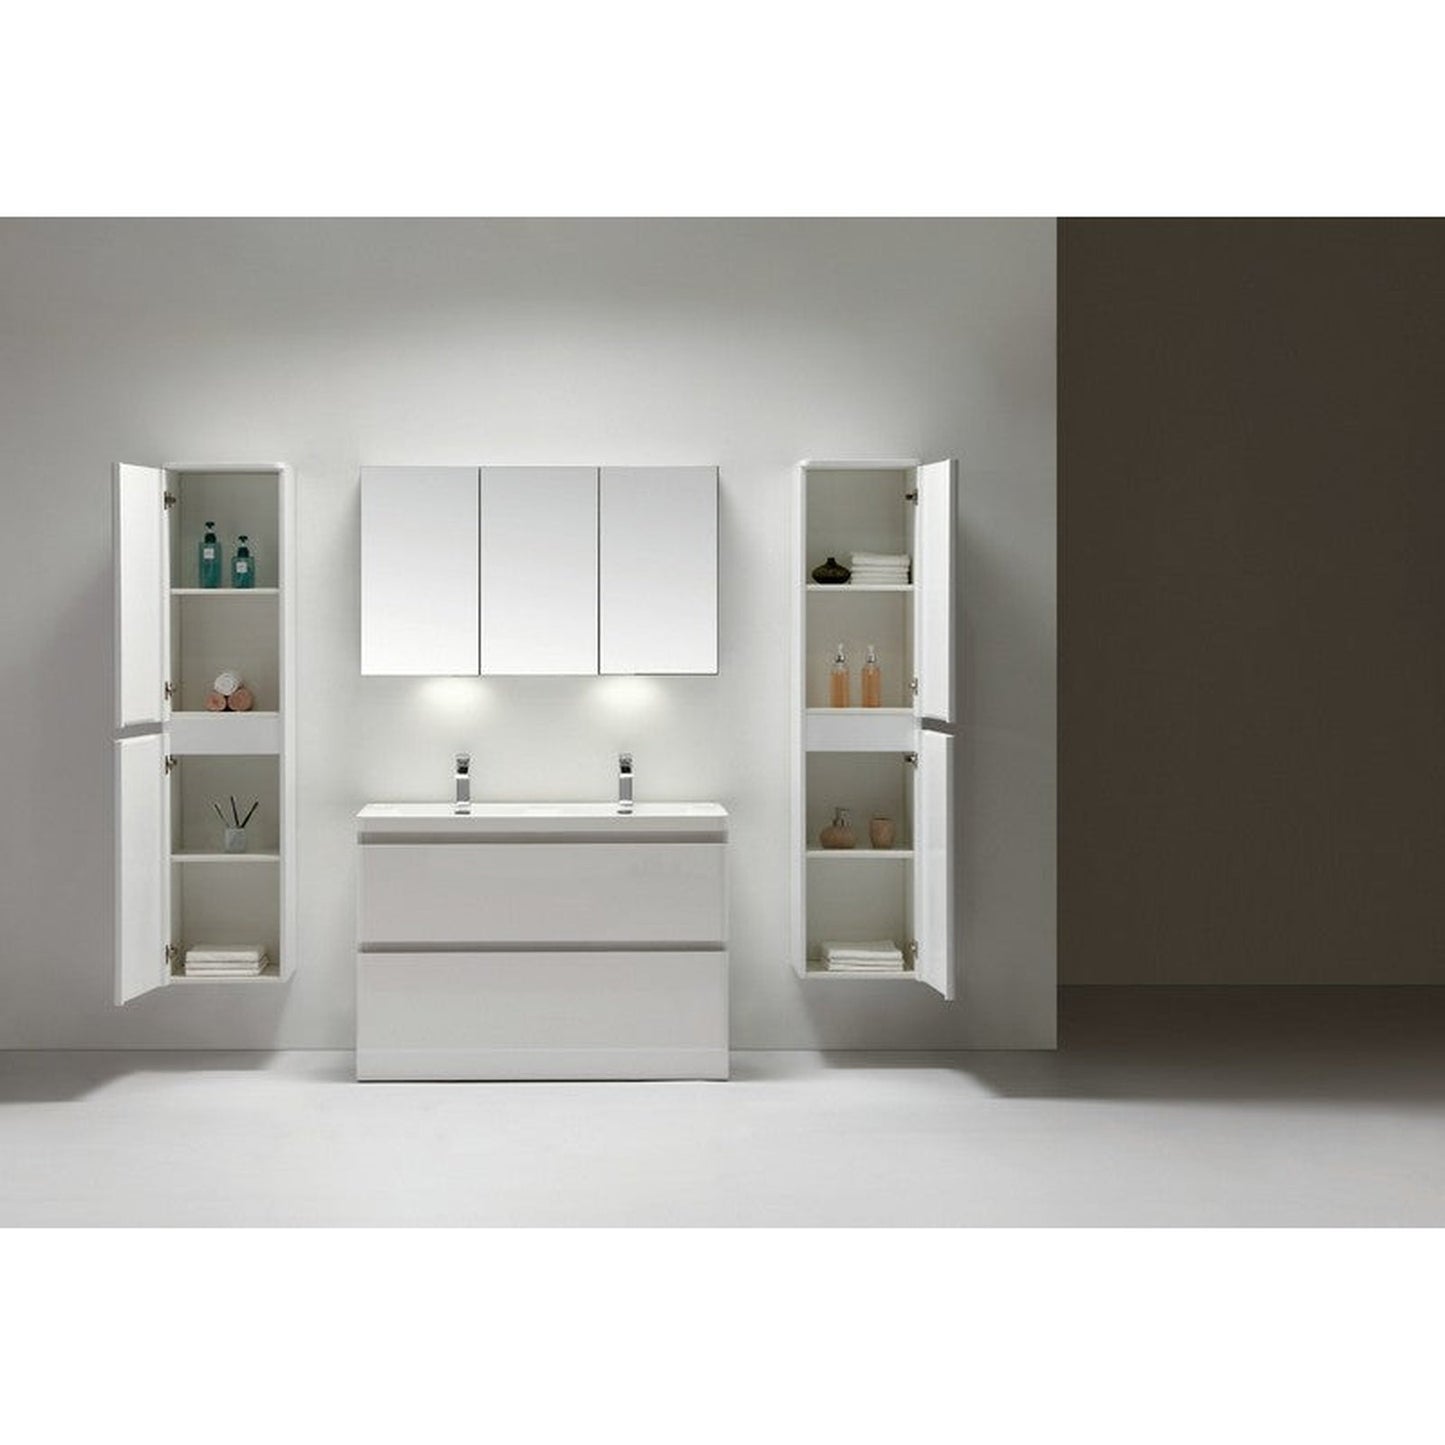 Eviva Glazzy 48" x 33.5" White Freestanding Bathroom Vanity With White Double Integrated Sink